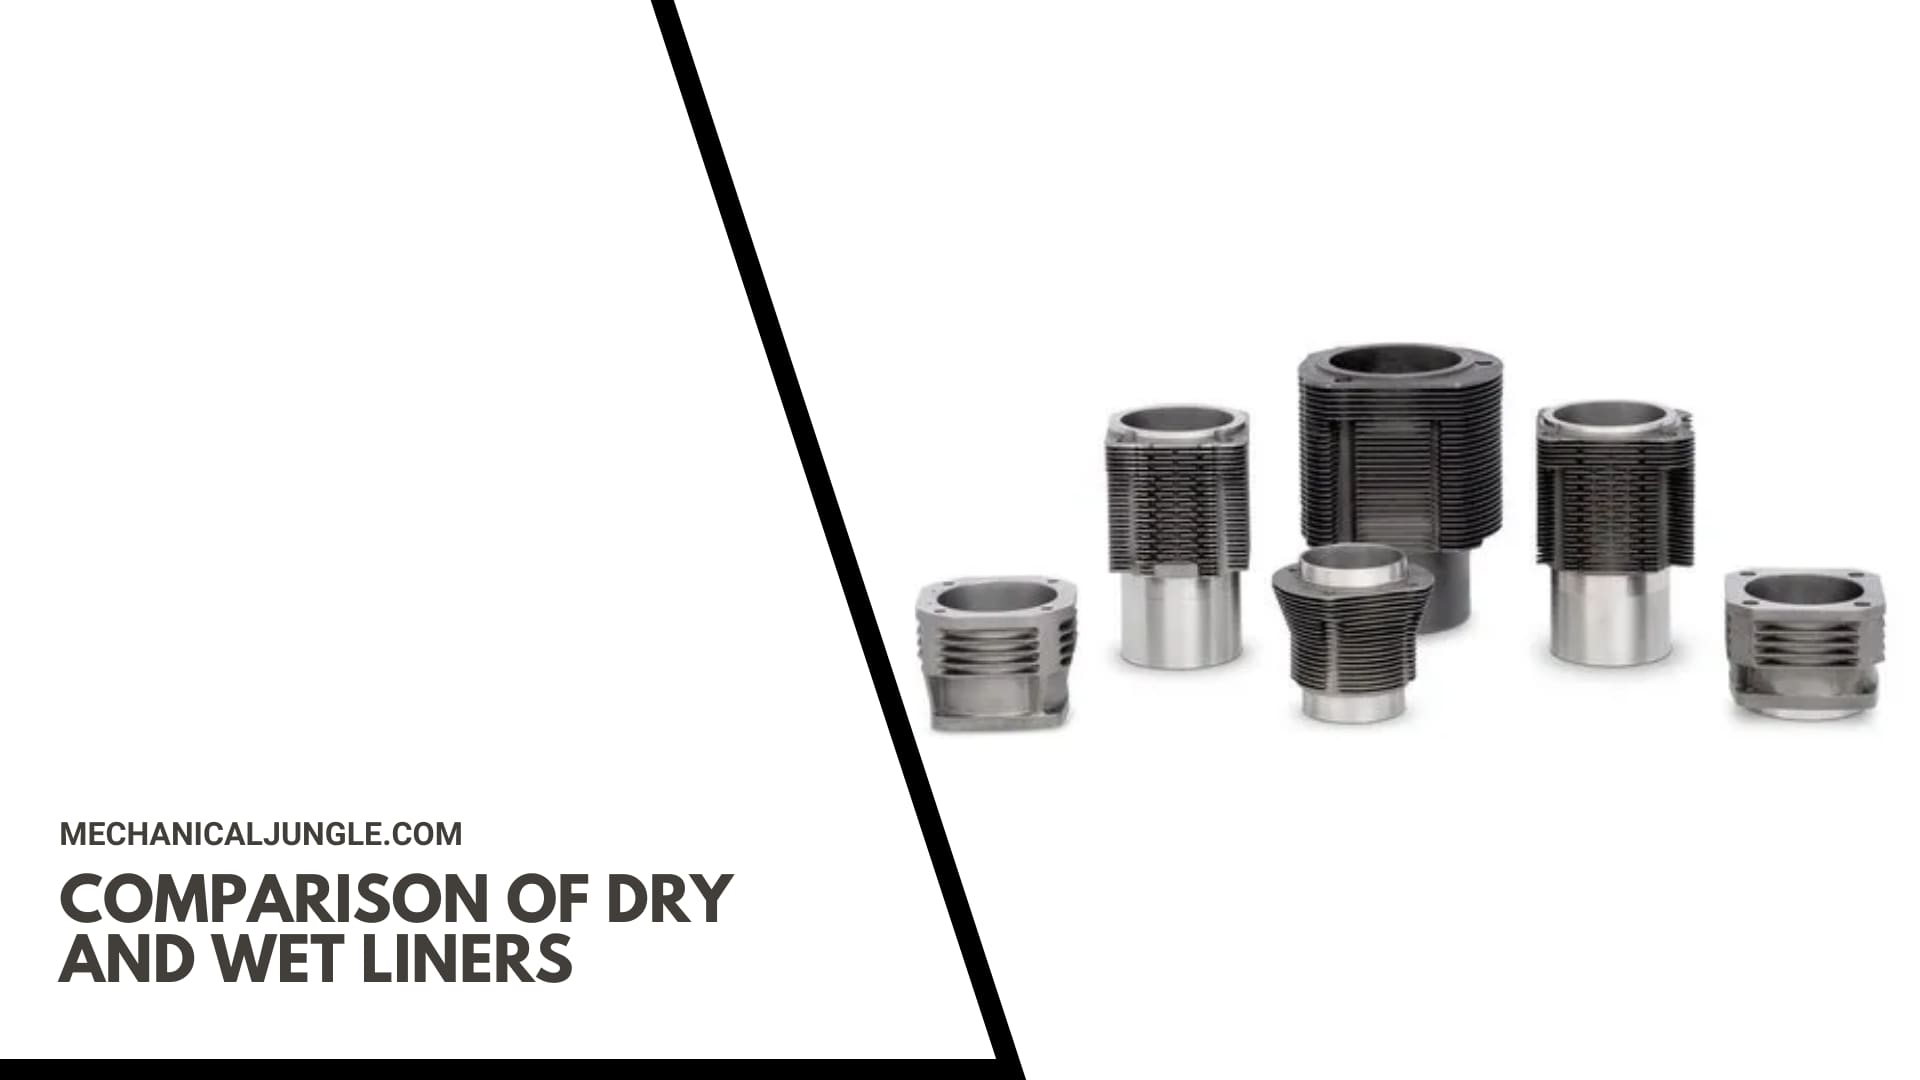 Comparison of Dry and Wet Liners